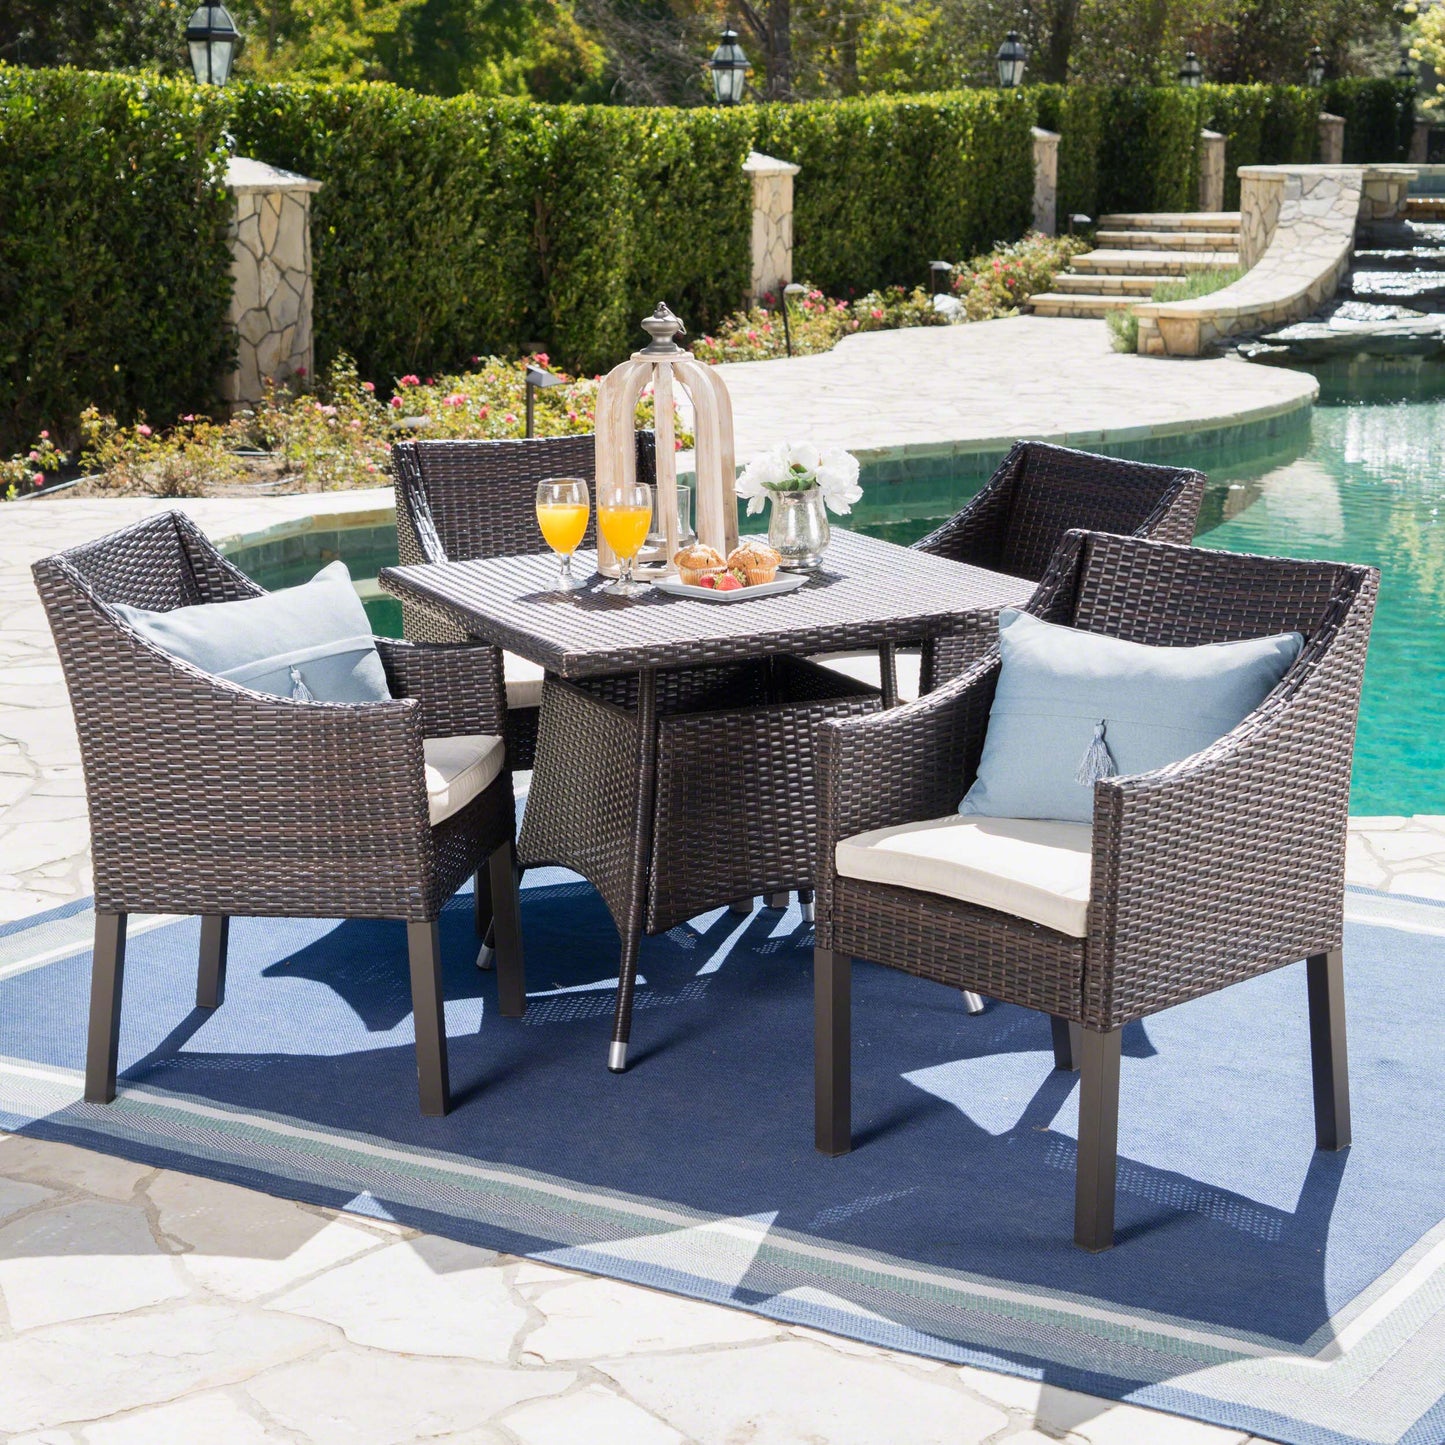 Frances Outdoor 5 Piece Wicker Round Dining Set with Water Resistant Cushions